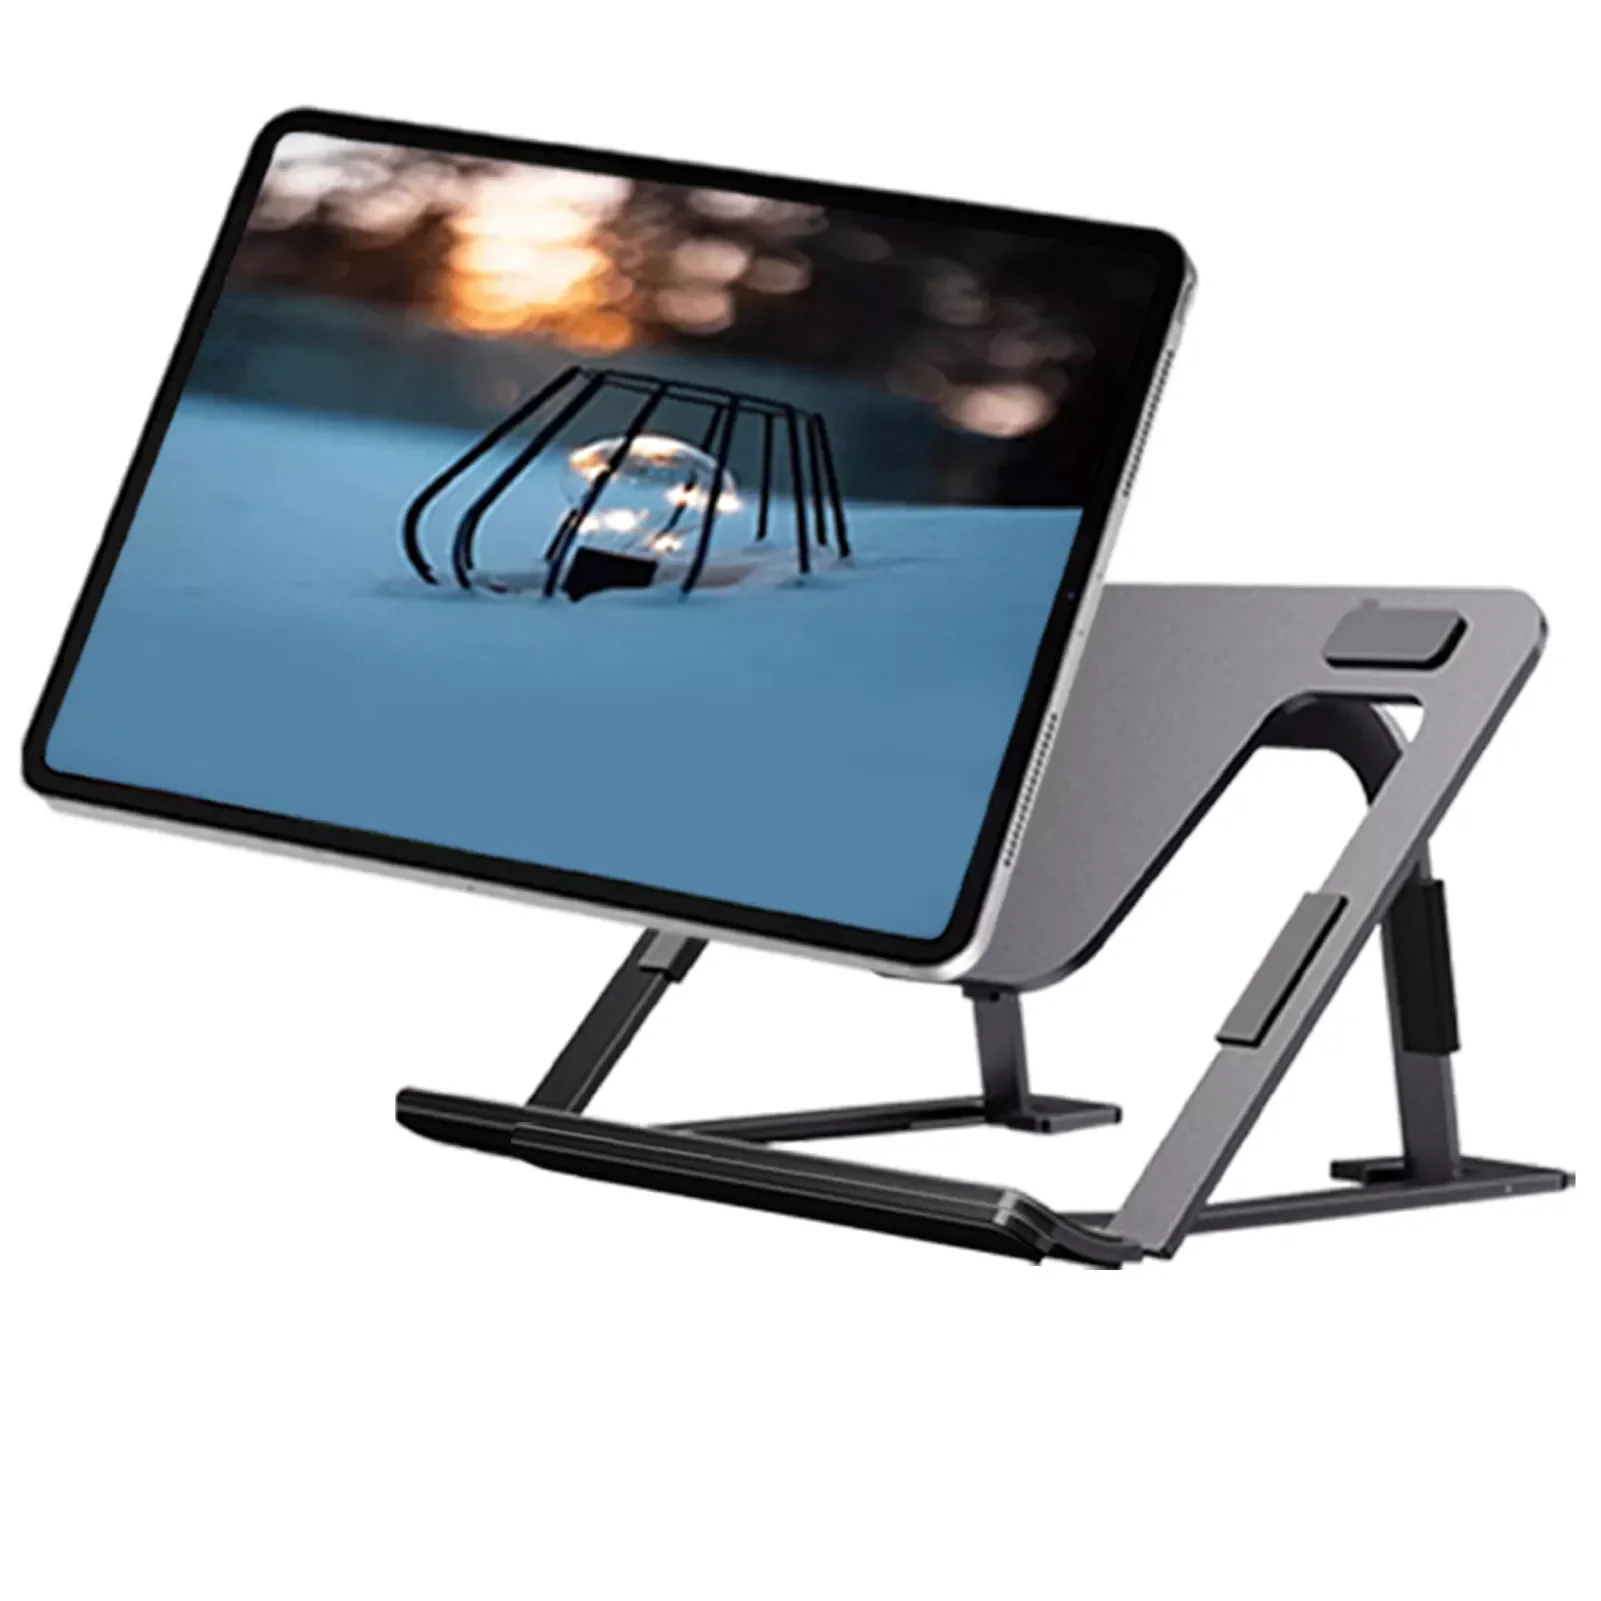 Laptop Stand For Desk 8 Angles Adjustable Portable Laptop Riser Foldable Computer Stand Anti-Slip Laptop Riser Compatible With 8